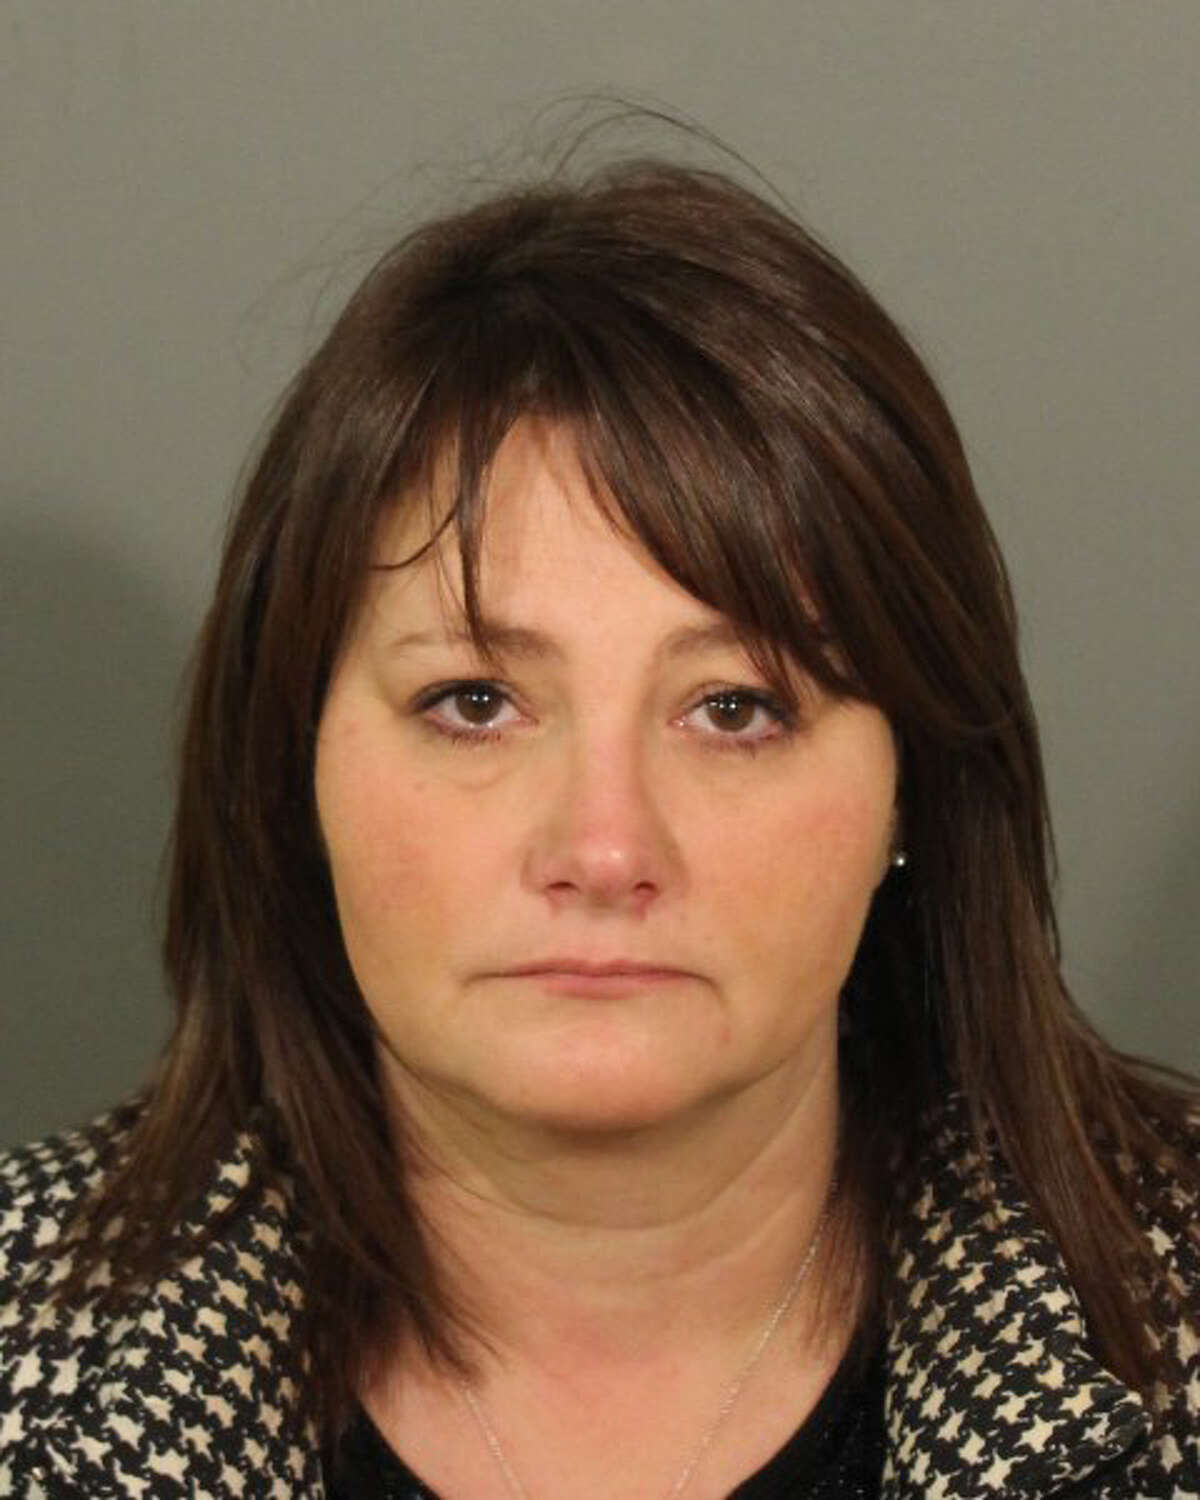 Traci Jones, 45, of Bethel, was charged Friday with third-degree assault, third-degree stalking, driving with intent to harass and breach of peace.